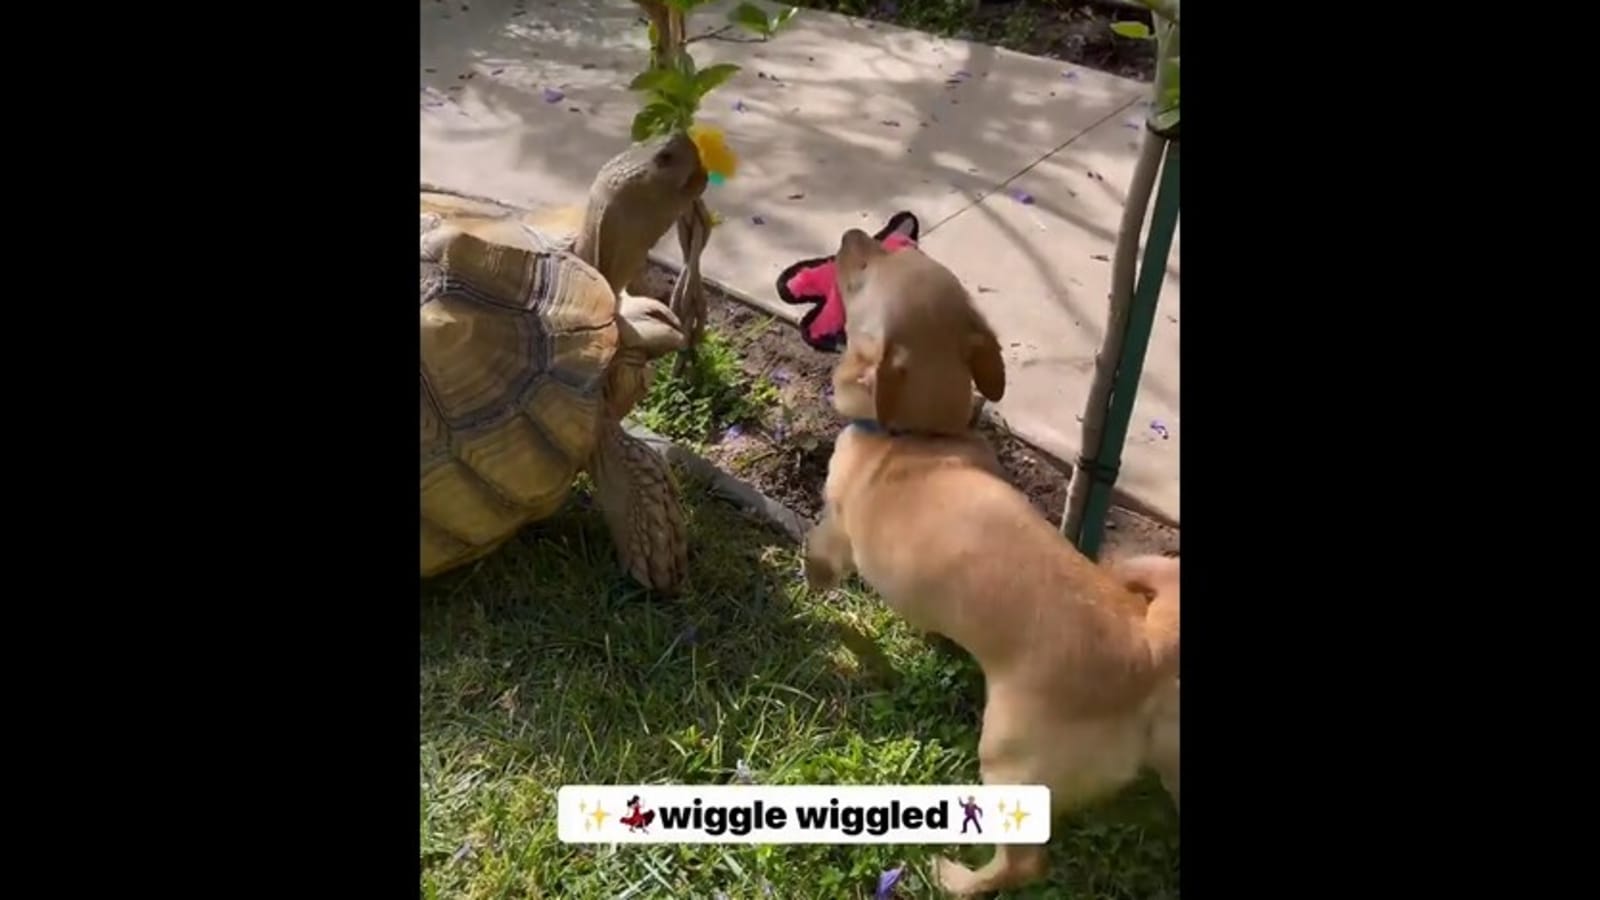 dog-gives-company-to-tortoise-friend-as-it-eats-a-flower-watch-sweet-video